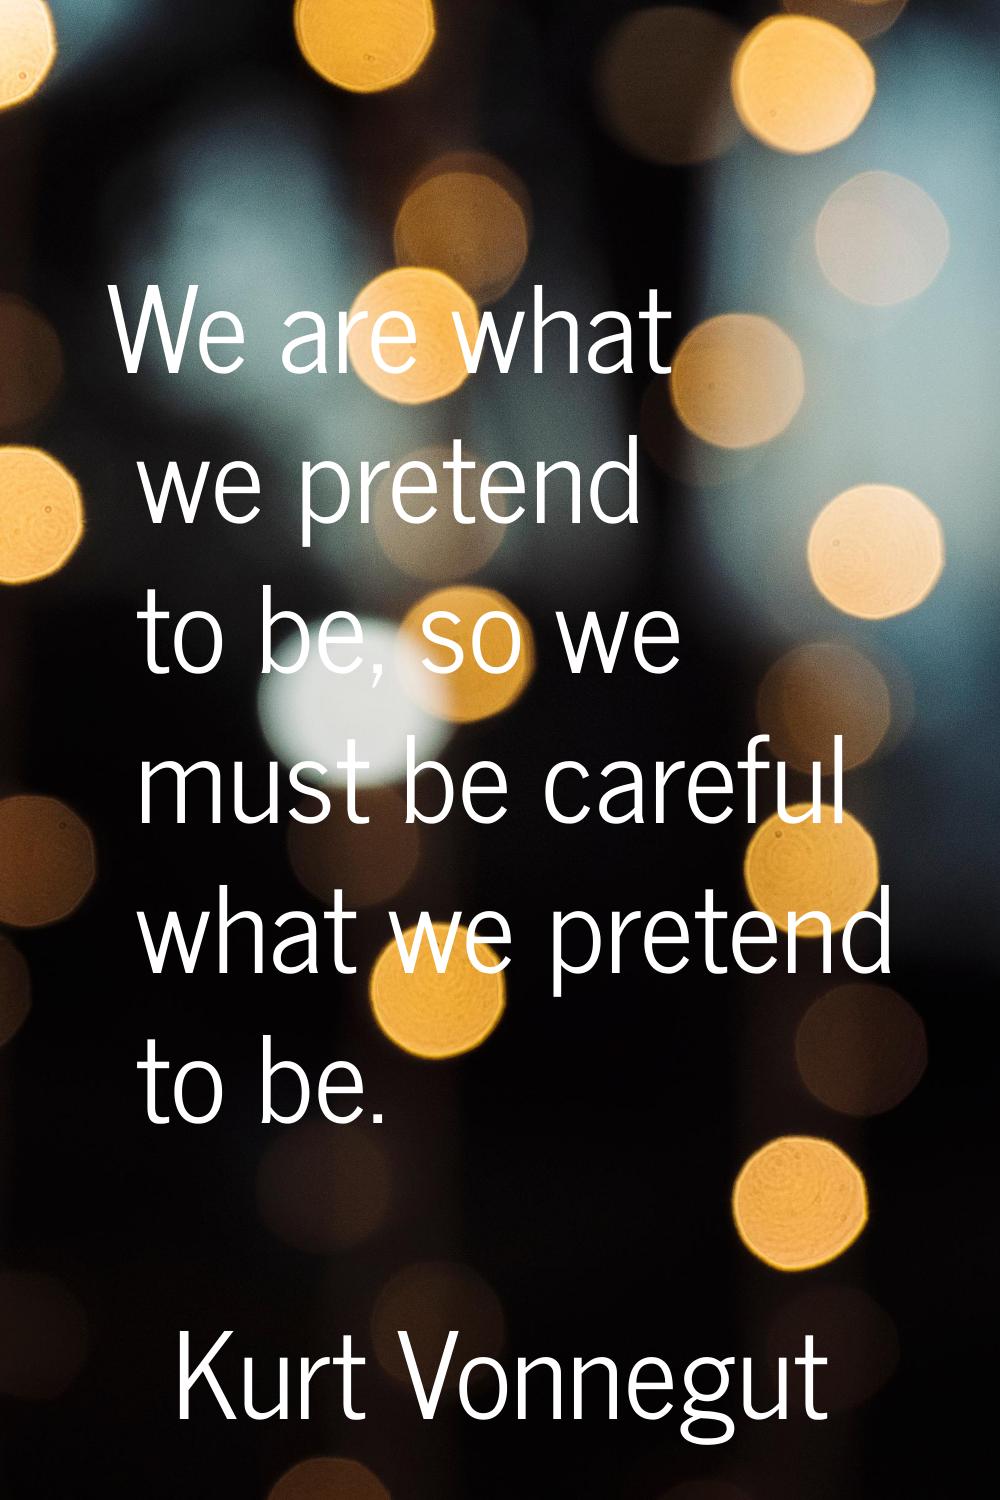 We are what we pretend to be, so we must be careful what we pretend to be.